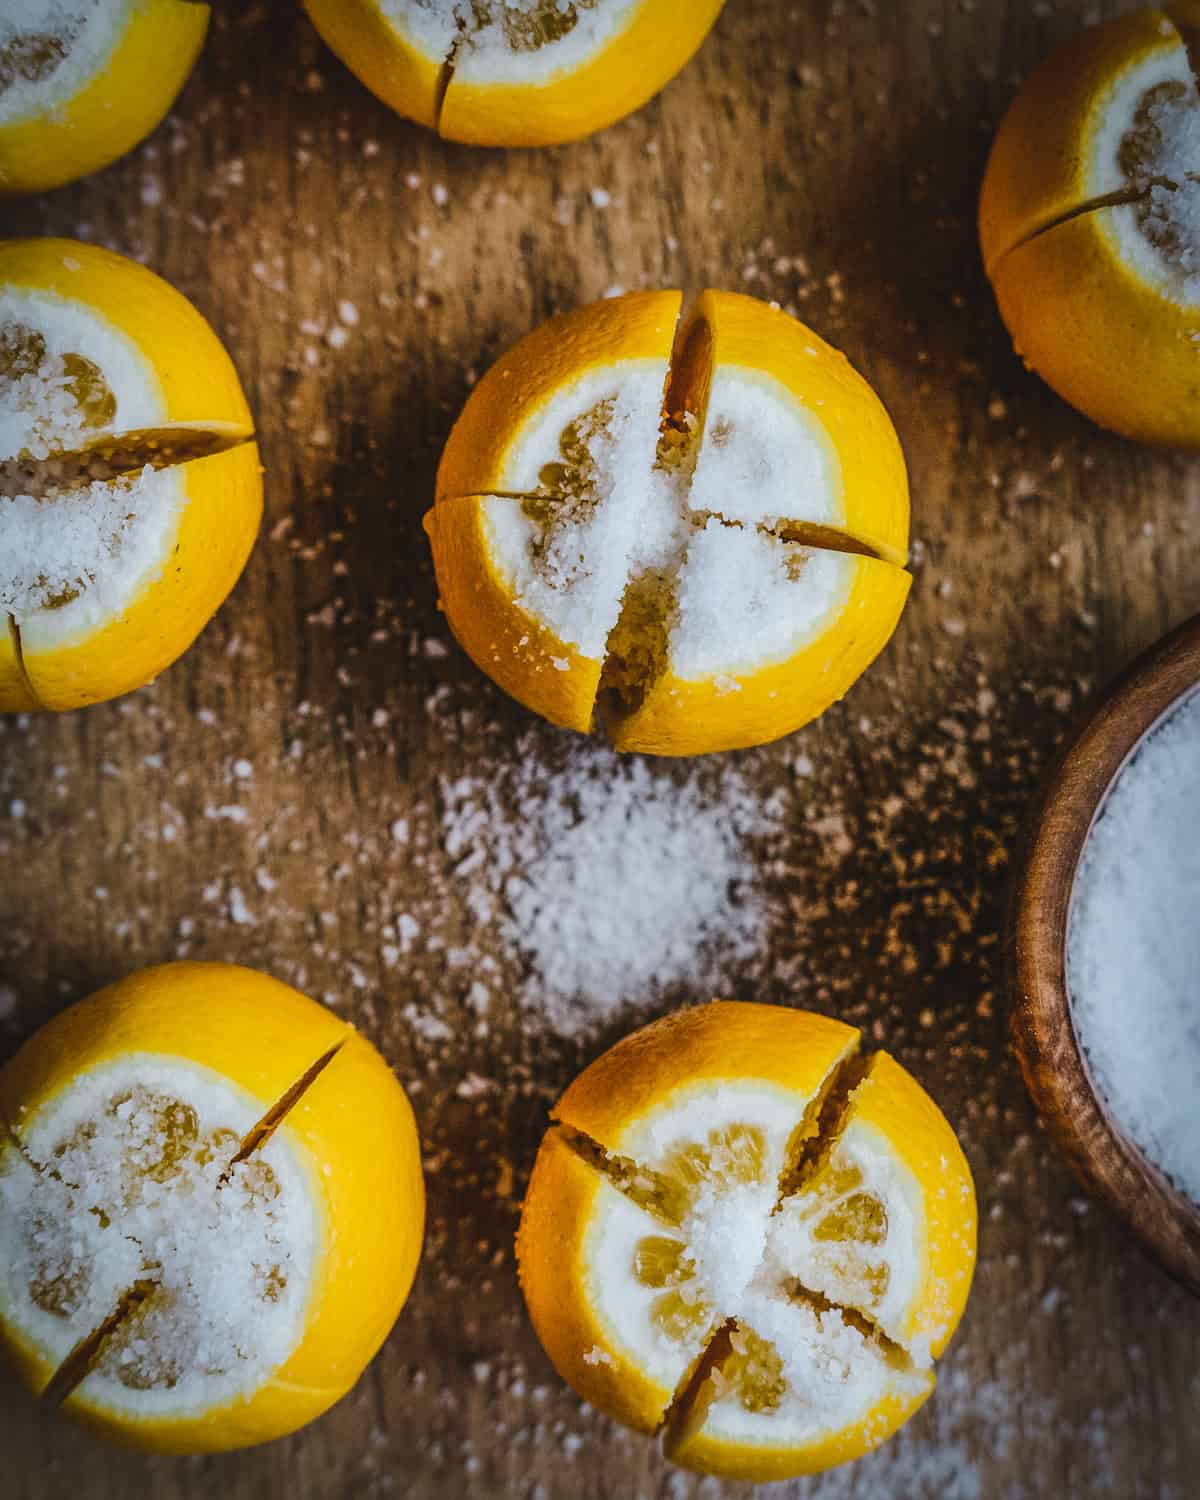 Lemons standing upright, sliced in quarters except for the bottom half inch keeping them connected at the bottoms. All are sprinkled with salt, and resting on a wooden cutting board. 